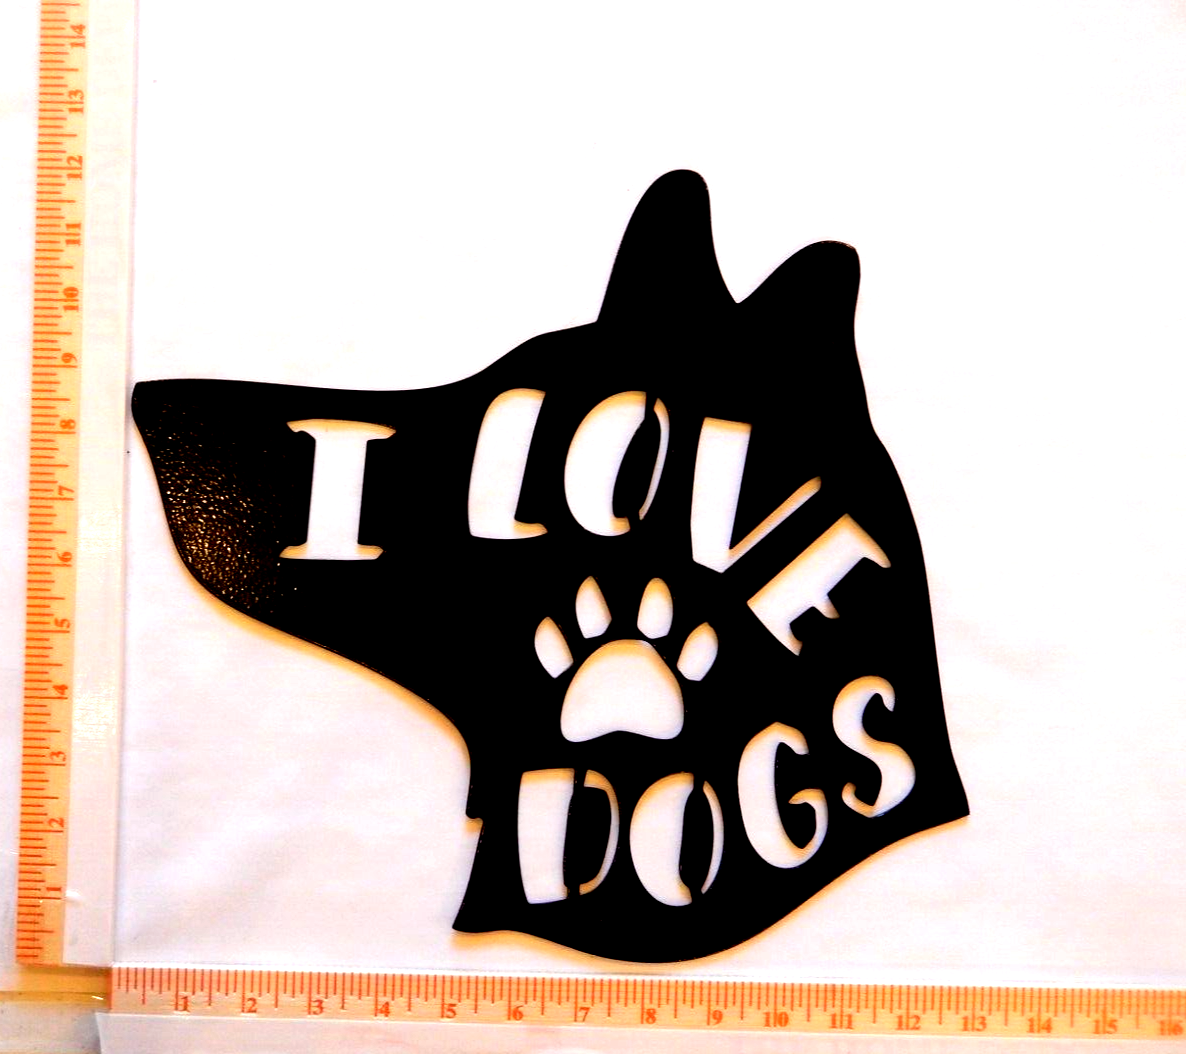 "I LOVE PAW DOGS" 14 gauge thick Black Painted  Metal Wall Art - 12" x 12"